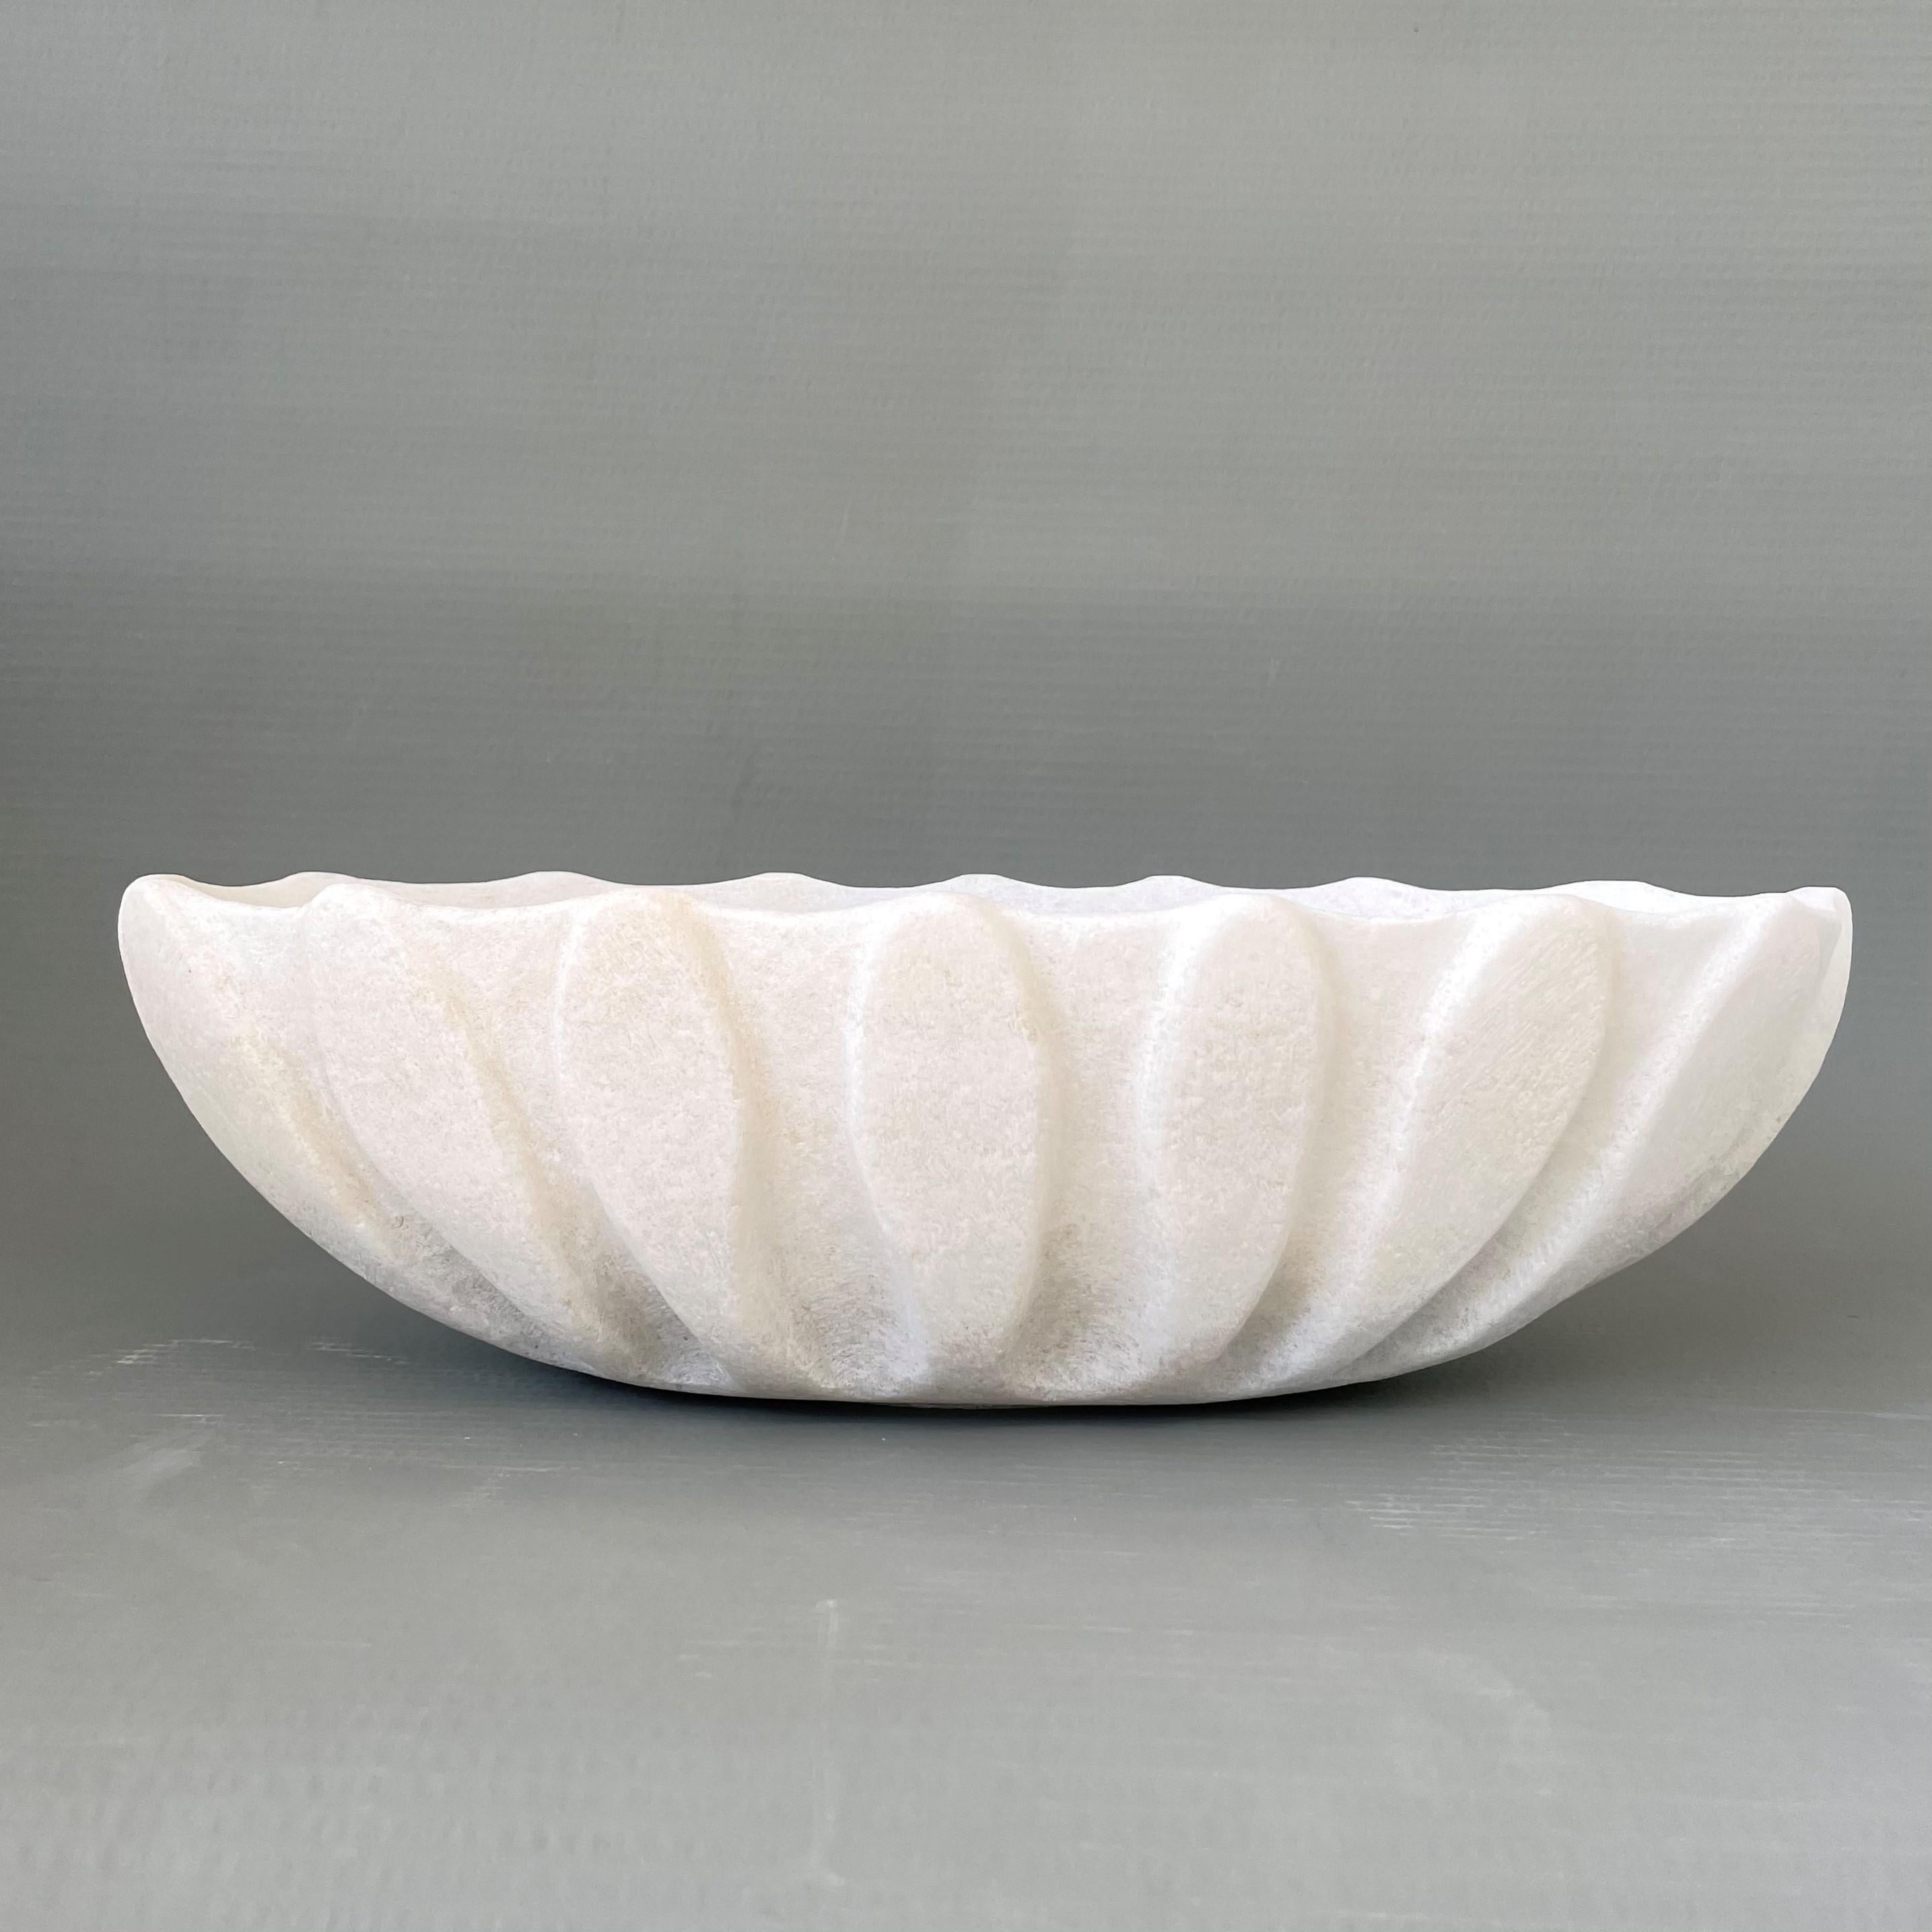 Hand carved marble vessel by Tom Von Kaenel
Dimensions: D45 x W21 x H13 cm
Materials: Marble

Tom von Kaenel, sculptor and painter, was born in Switzerland in 1961. Already in his early childhood he was deeply devoted to art. His desire to bring